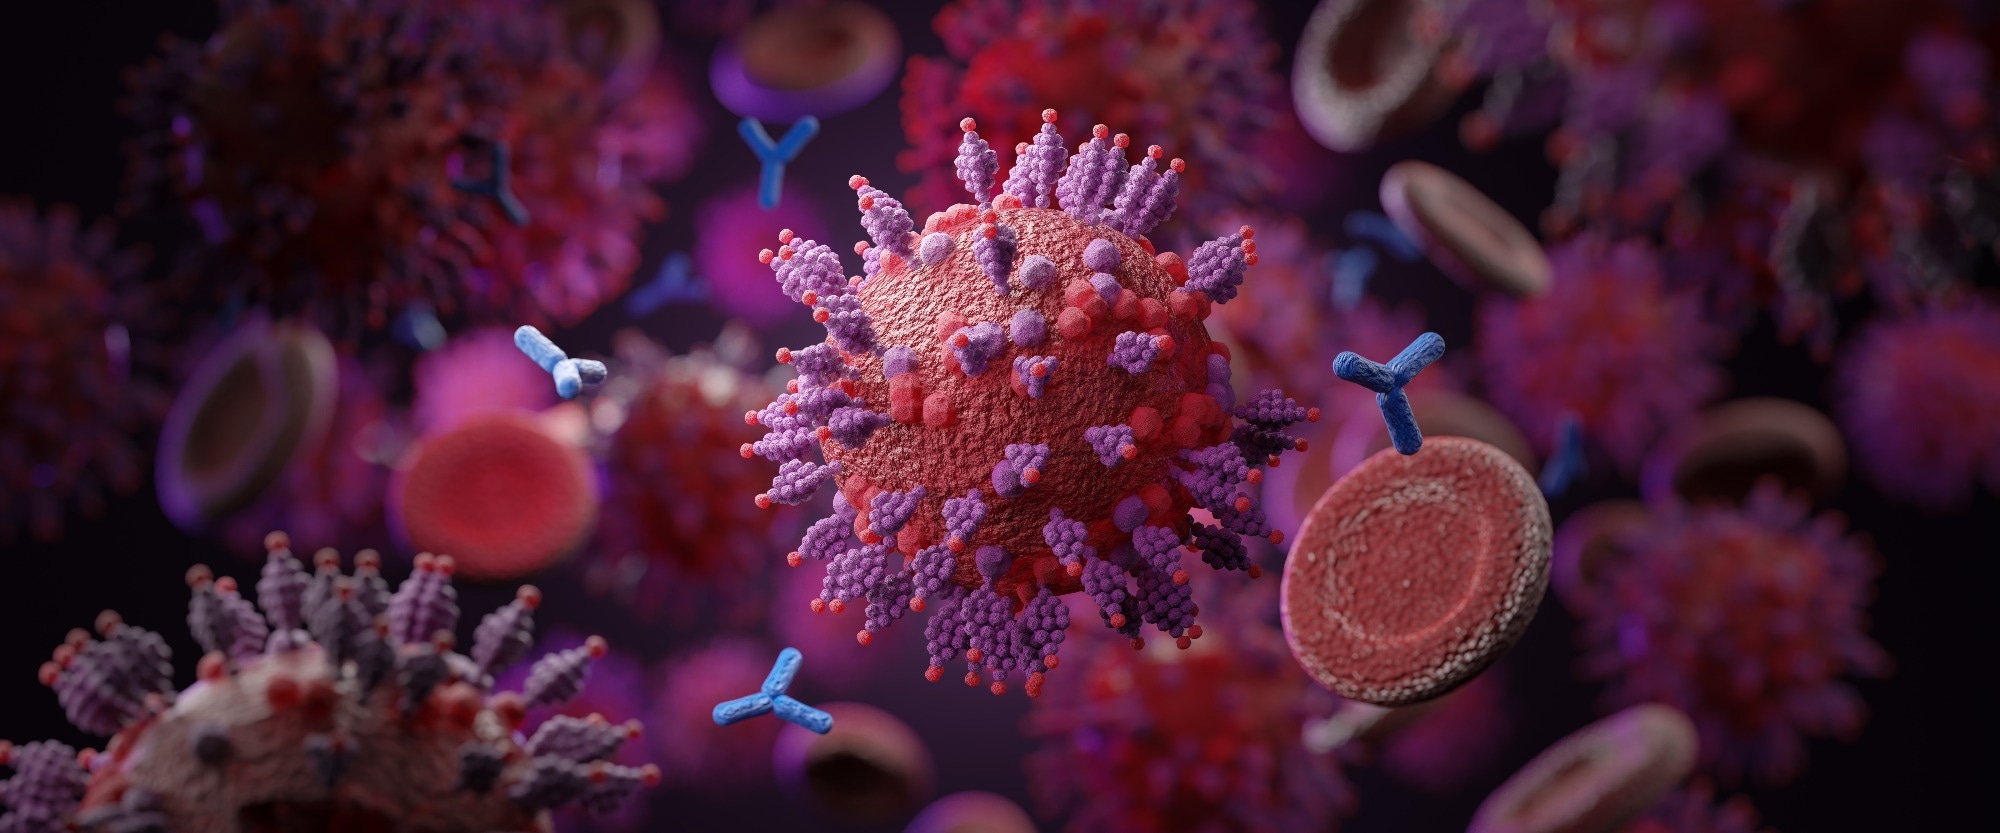 Study: Enhanced transmissibility, infectivity and immune resistance of the SARS-CoV-2 Omicron XBB.1.5 variant. Image Credit: Fit Ztudio/Shutterstock